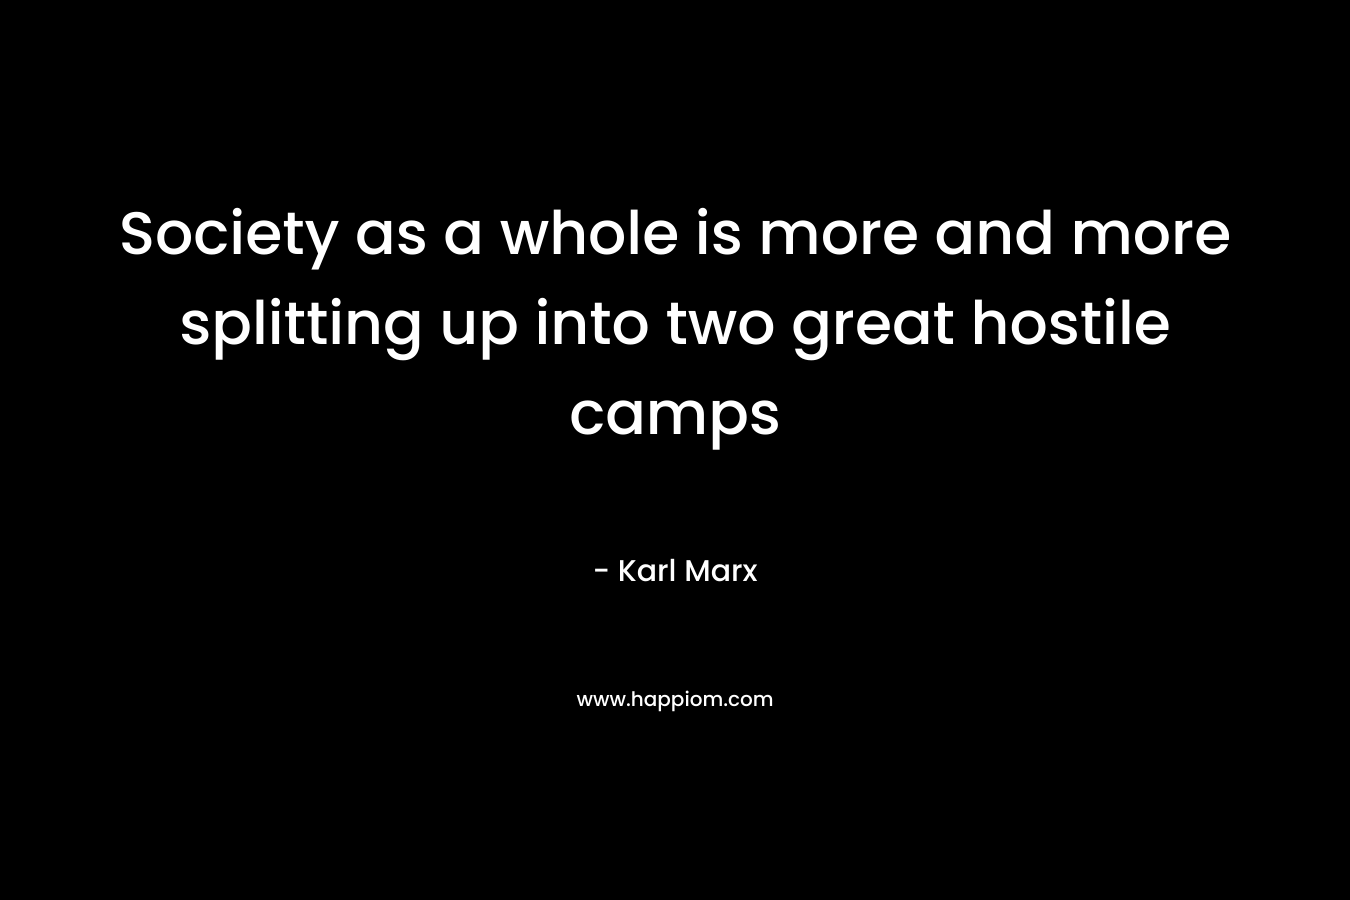 Society as a whole is more and more splitting up into two great hostile camps